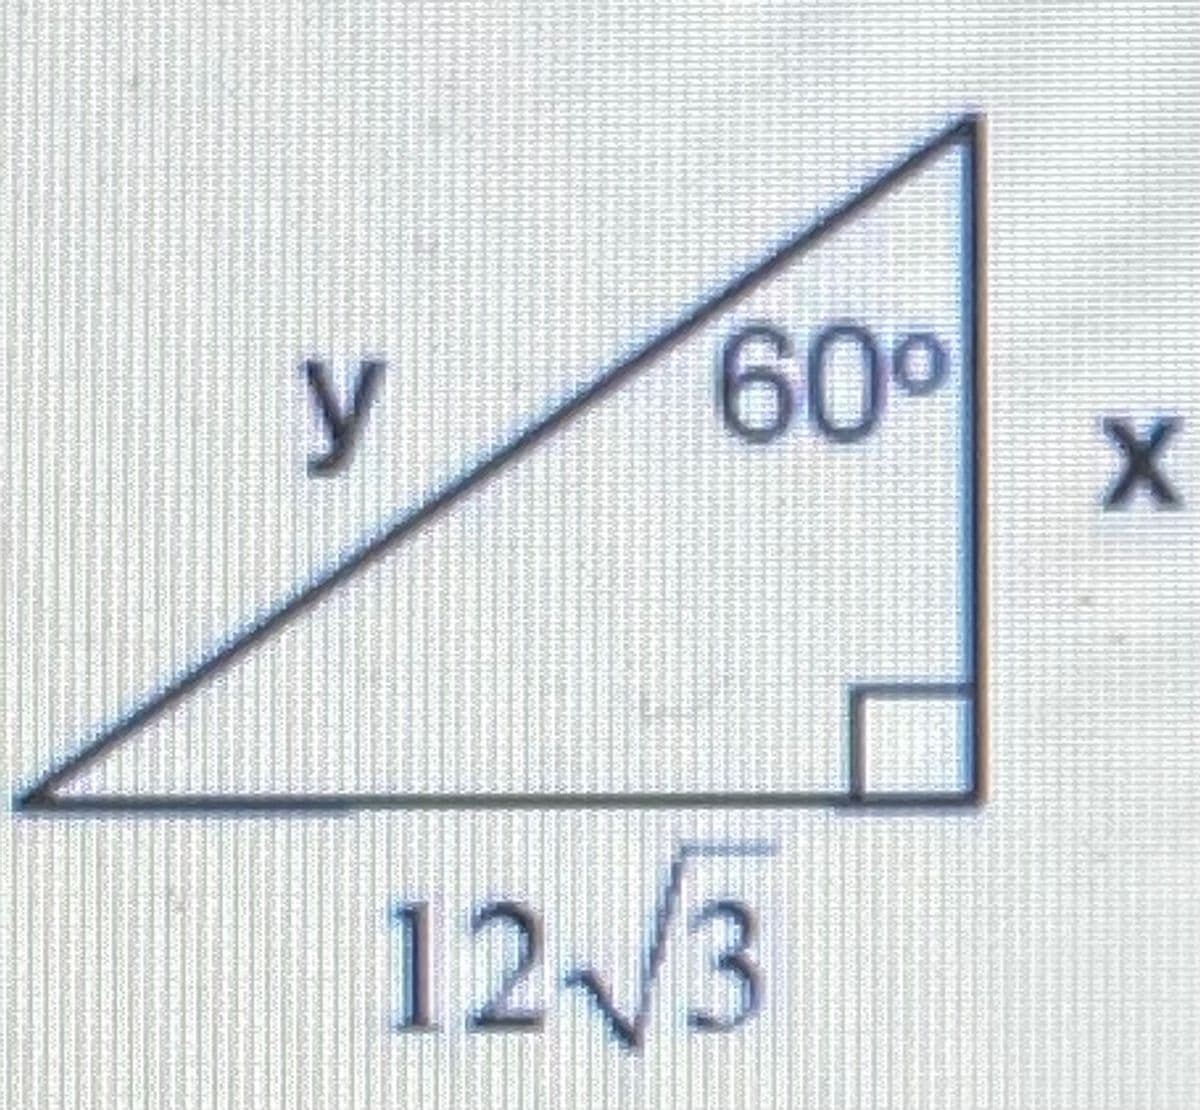 This image illustrates a right triangle with a given side length and angle measurement. The components of the triangle are labeled as follows:

- \( y \) represents the hypotenuse of the triangle.
- \( x \) represents the other leg of the triangle.
- The given side length adjacent to the 60-degree angle is \( 12\sqrt{3} \).

The angle opposite the side \( 12\sqrt{3} \) is \( 60^\circ \), and the right angle (90 degrees) is denoted by the small square at the corner of the triangle.

This triangle can be analyzed using trigonometric principles. Because it includes a 60-degree angle, it is a 30-60-90 triangle. In such triangles, the ratios between the lengths of the sides are always consistent. Specifically:

- The side opposite the 30-degree angle is \( s \).
- The side opposite the 60-degree angle is \( s\sqrt{3} \).
- The hypotenuse is \( 2s \).

Given the side length \( 12\sqrt{3} \) opposite the 60-degree angle, we can find the other sides using these ratios.